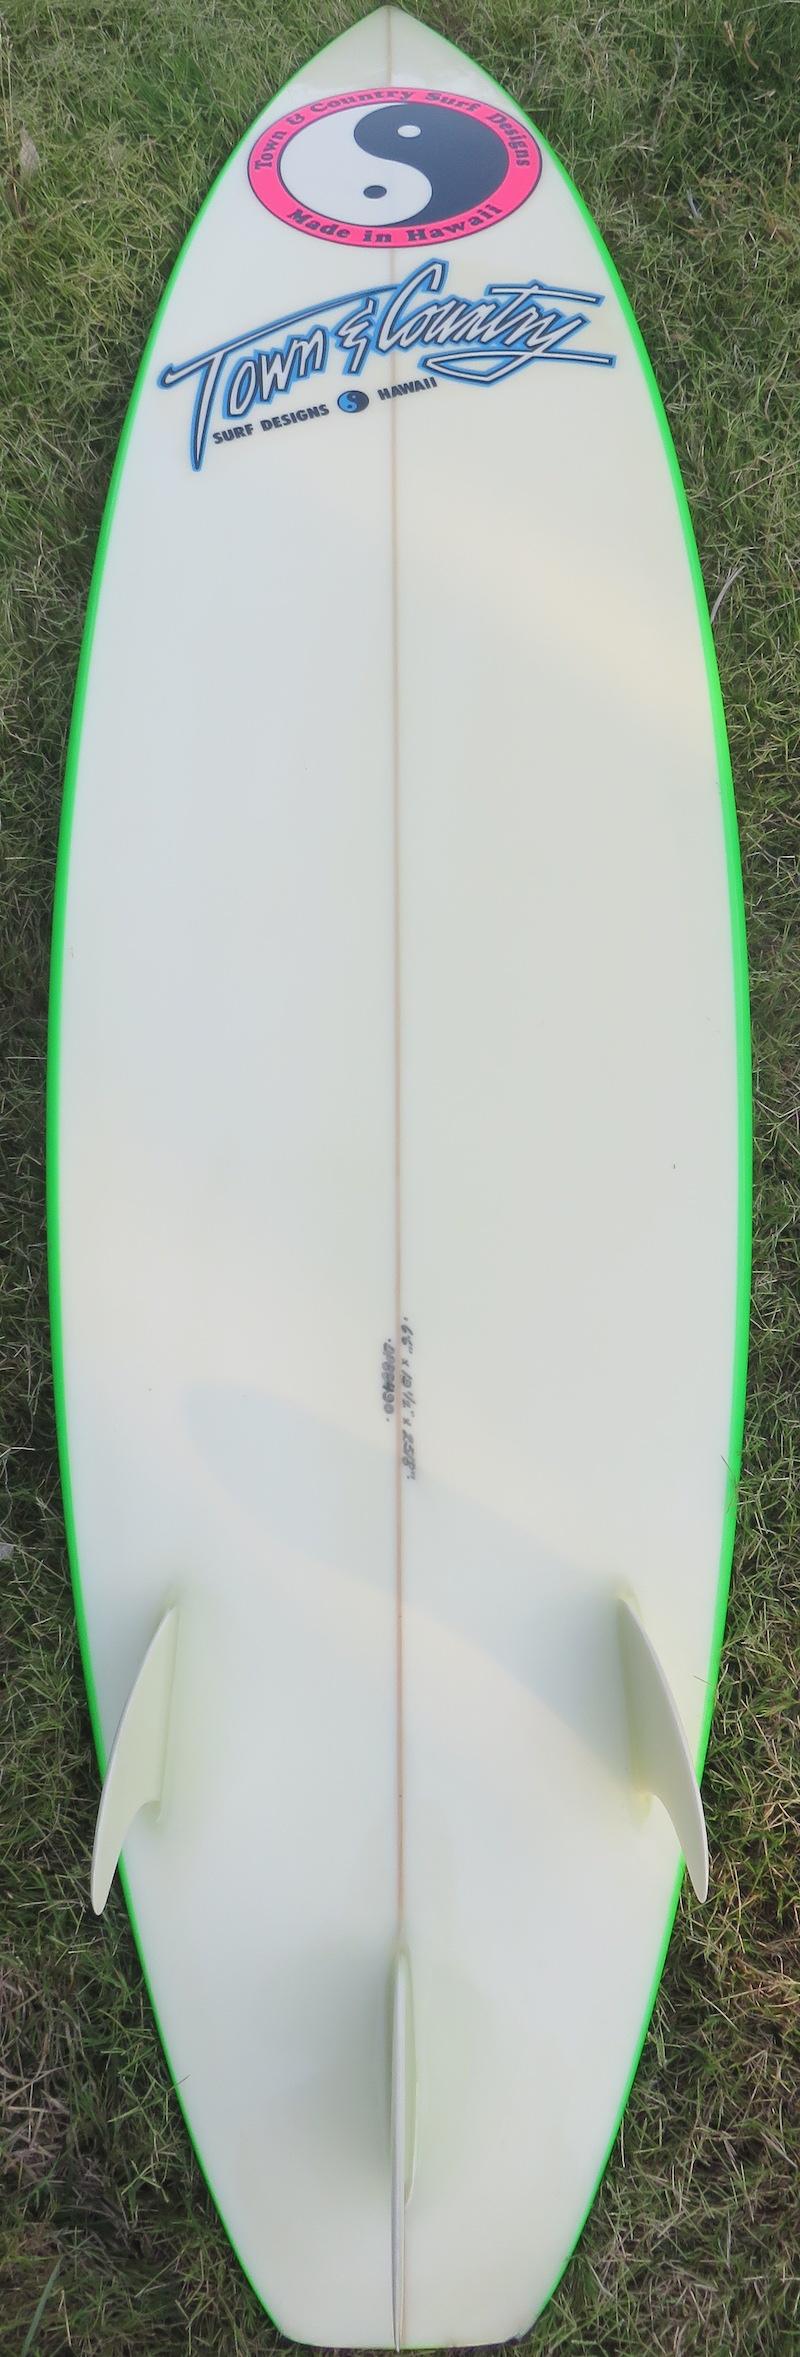 Vintage 1980s Town & Country 'T&C' Surfboard by Dennis Pang 3